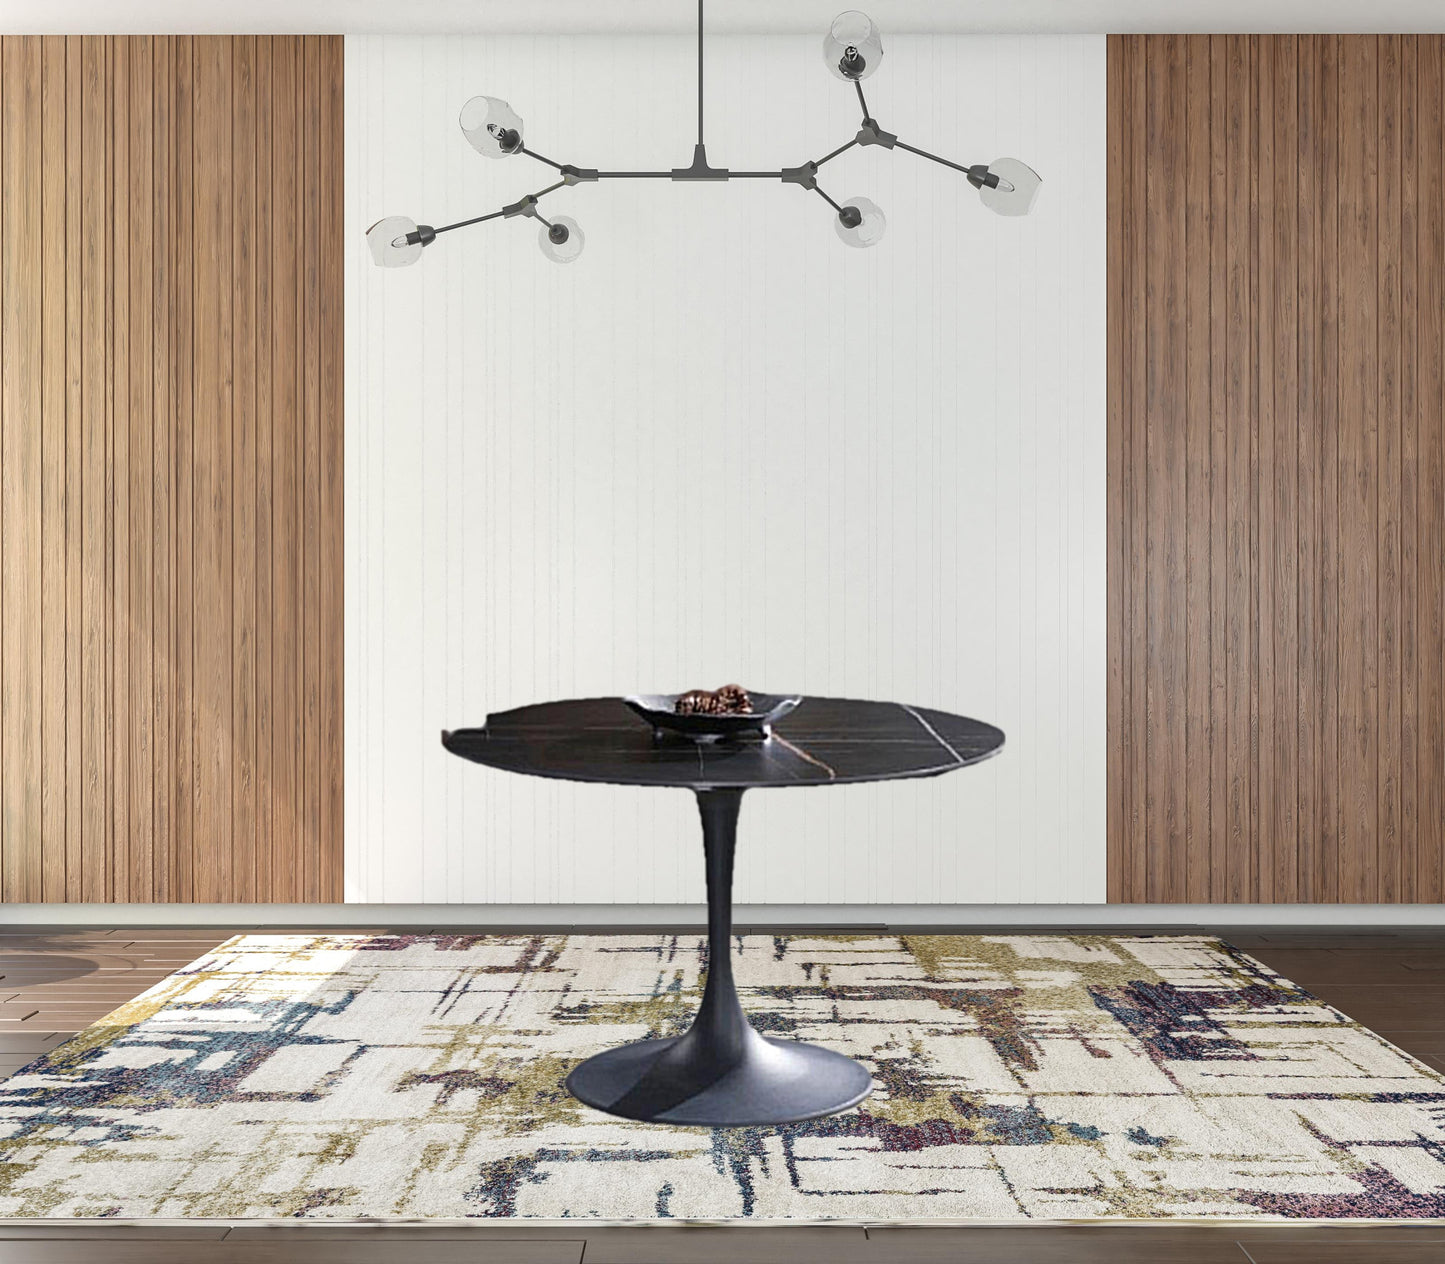 47" Black Rounded Ceramic And Metal Pedestal Base Dining Table